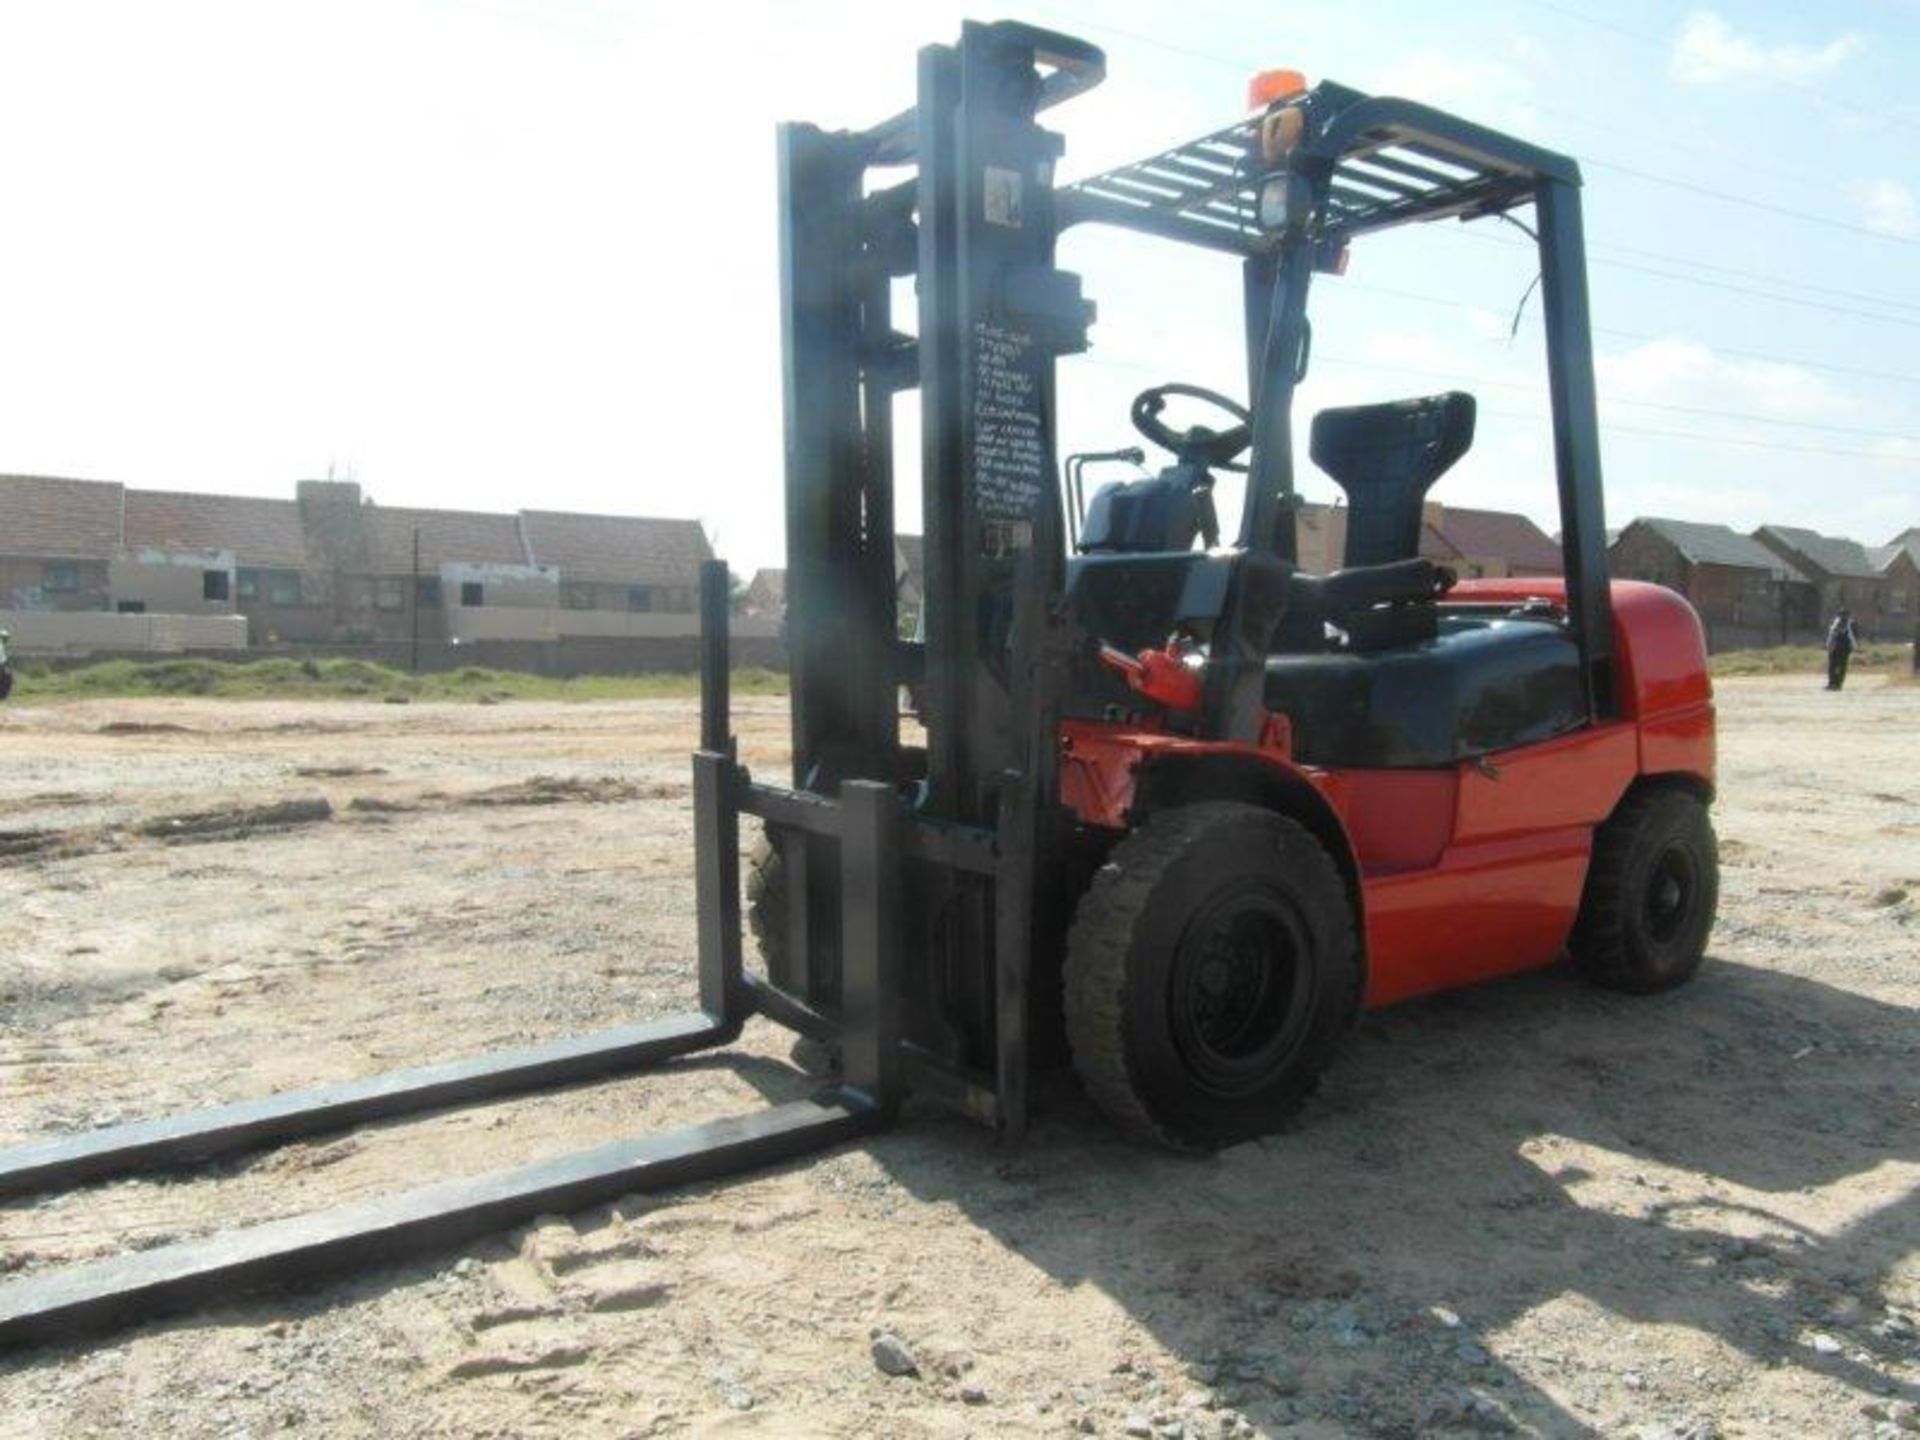 Heli GPC30-X5 Forklift With Extendable Forks (Vin No:061263305)(No Key, No Battery, Hours Do Not